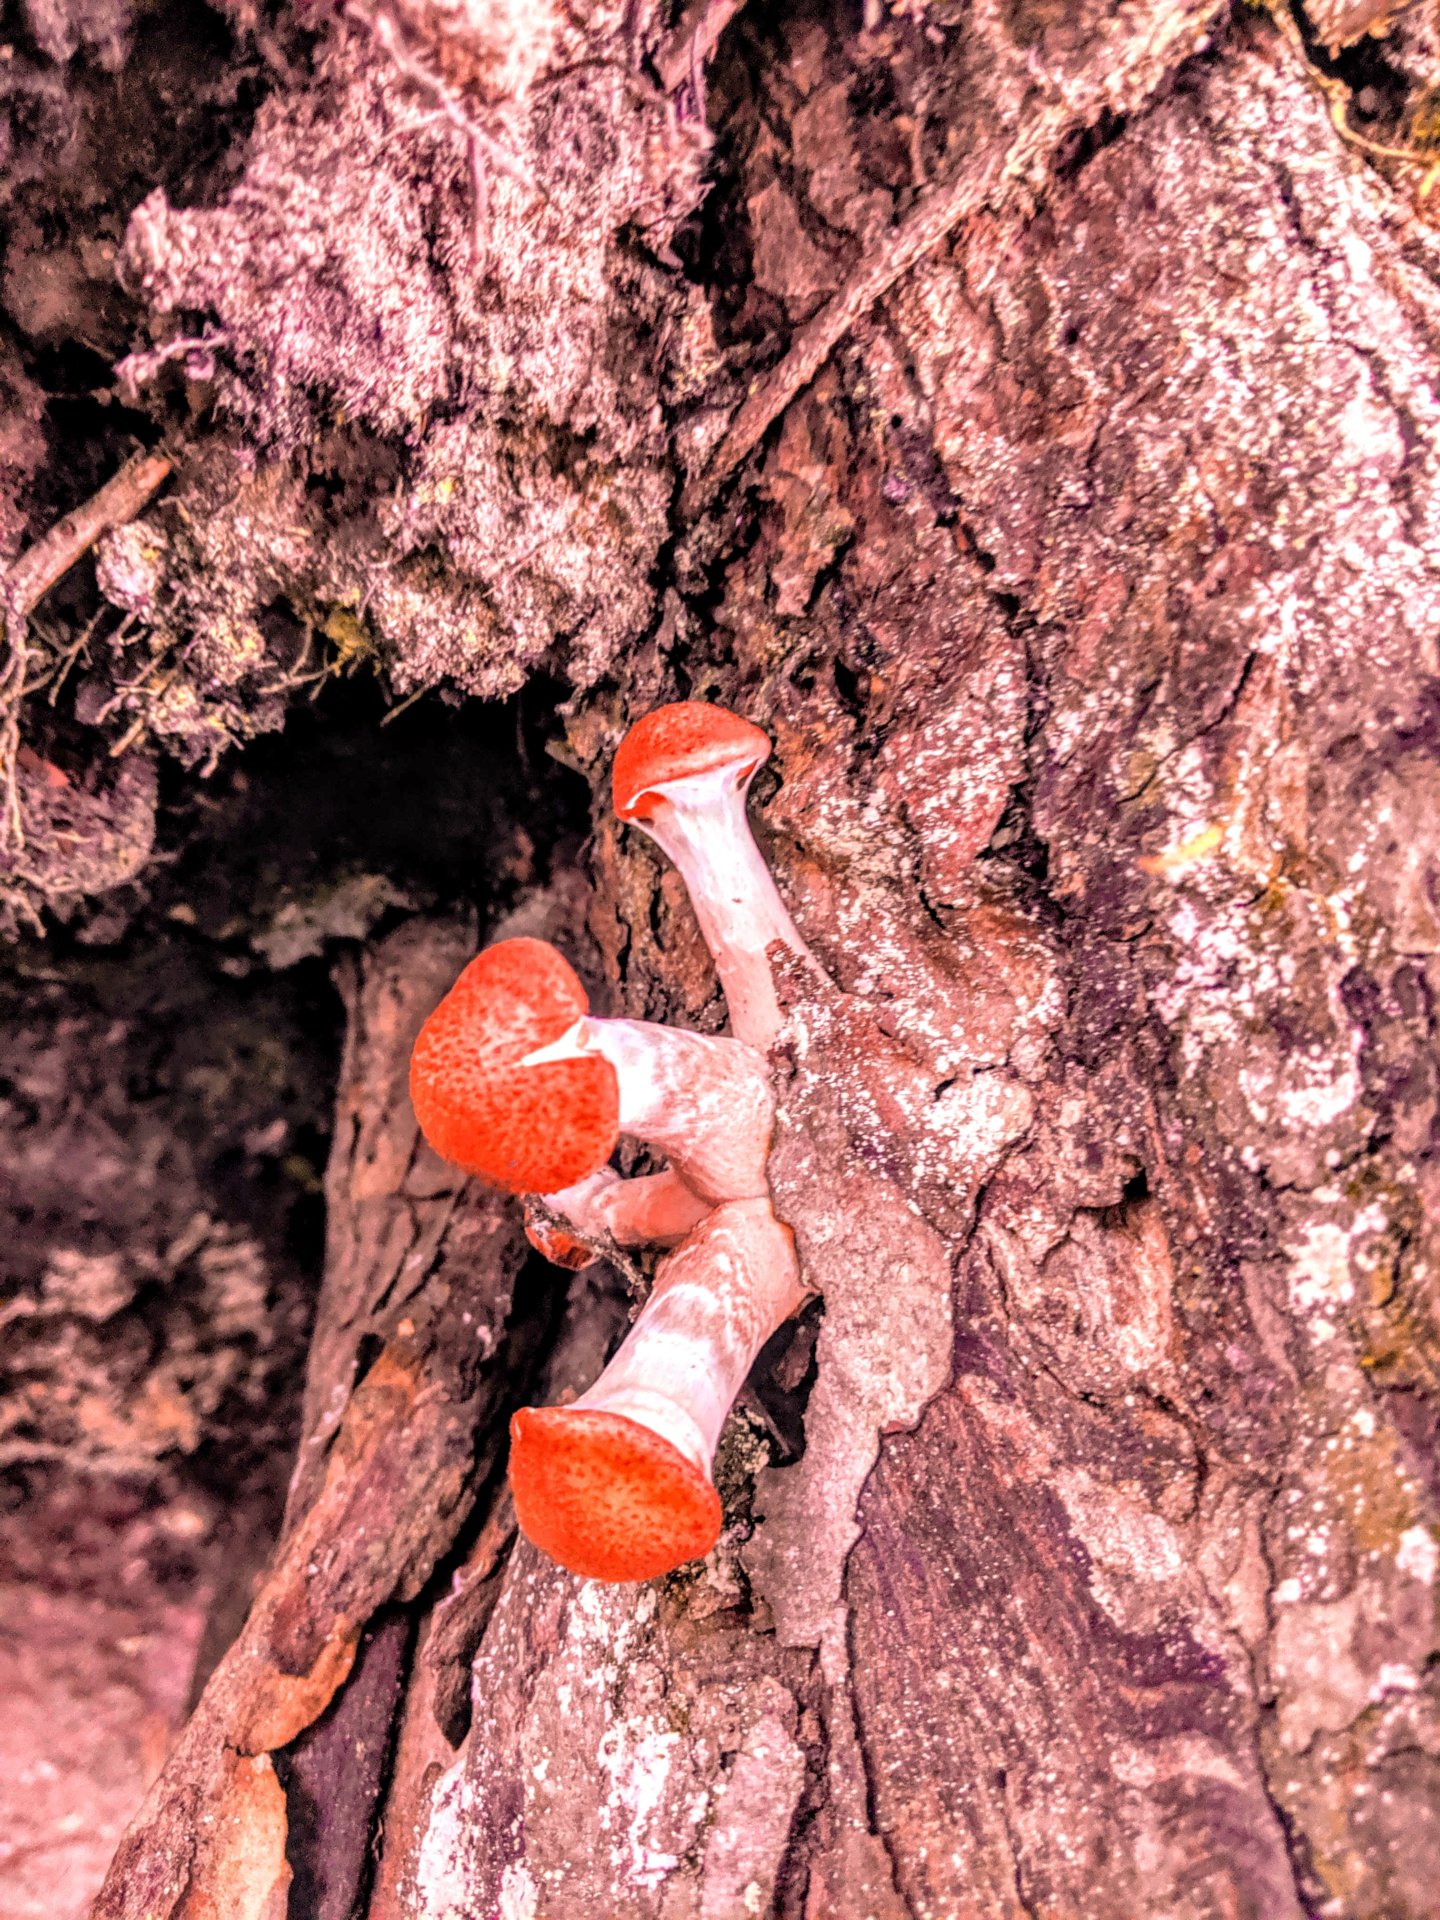 Three red cap mushrooms, growing out of the side of a log in Downeast, Maine. 2019